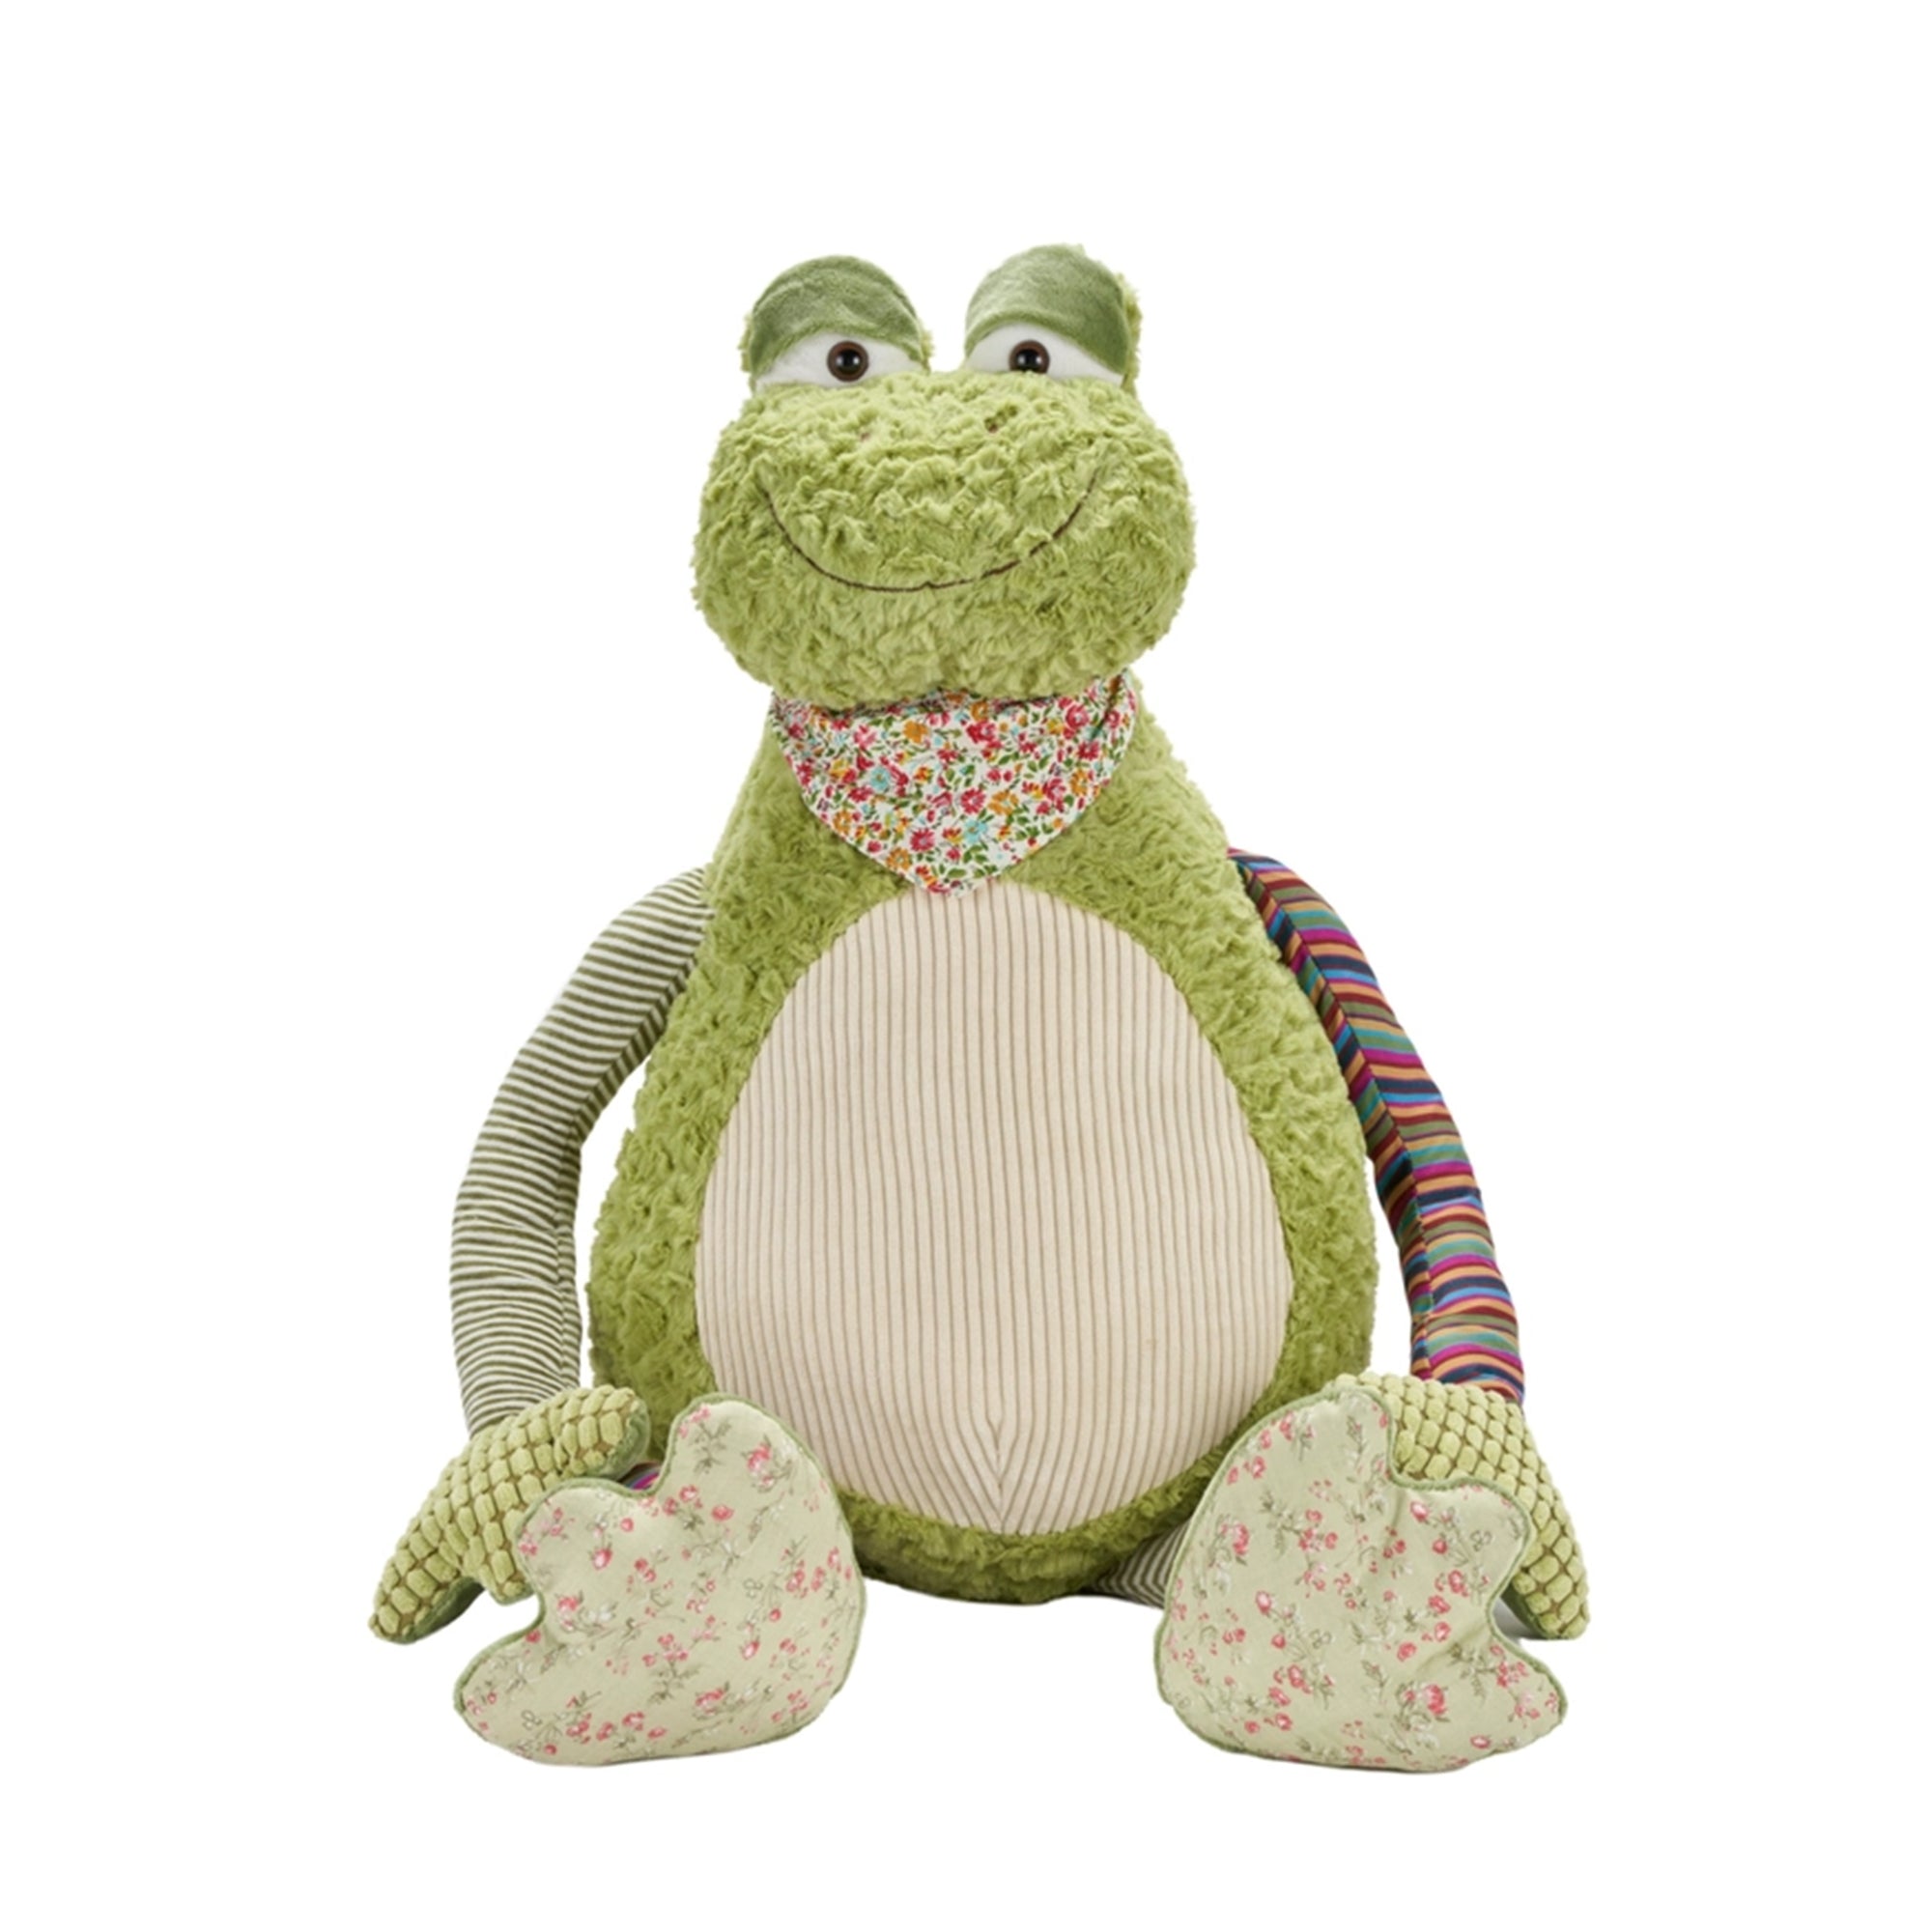 Fred the Green Frog Plush Animal